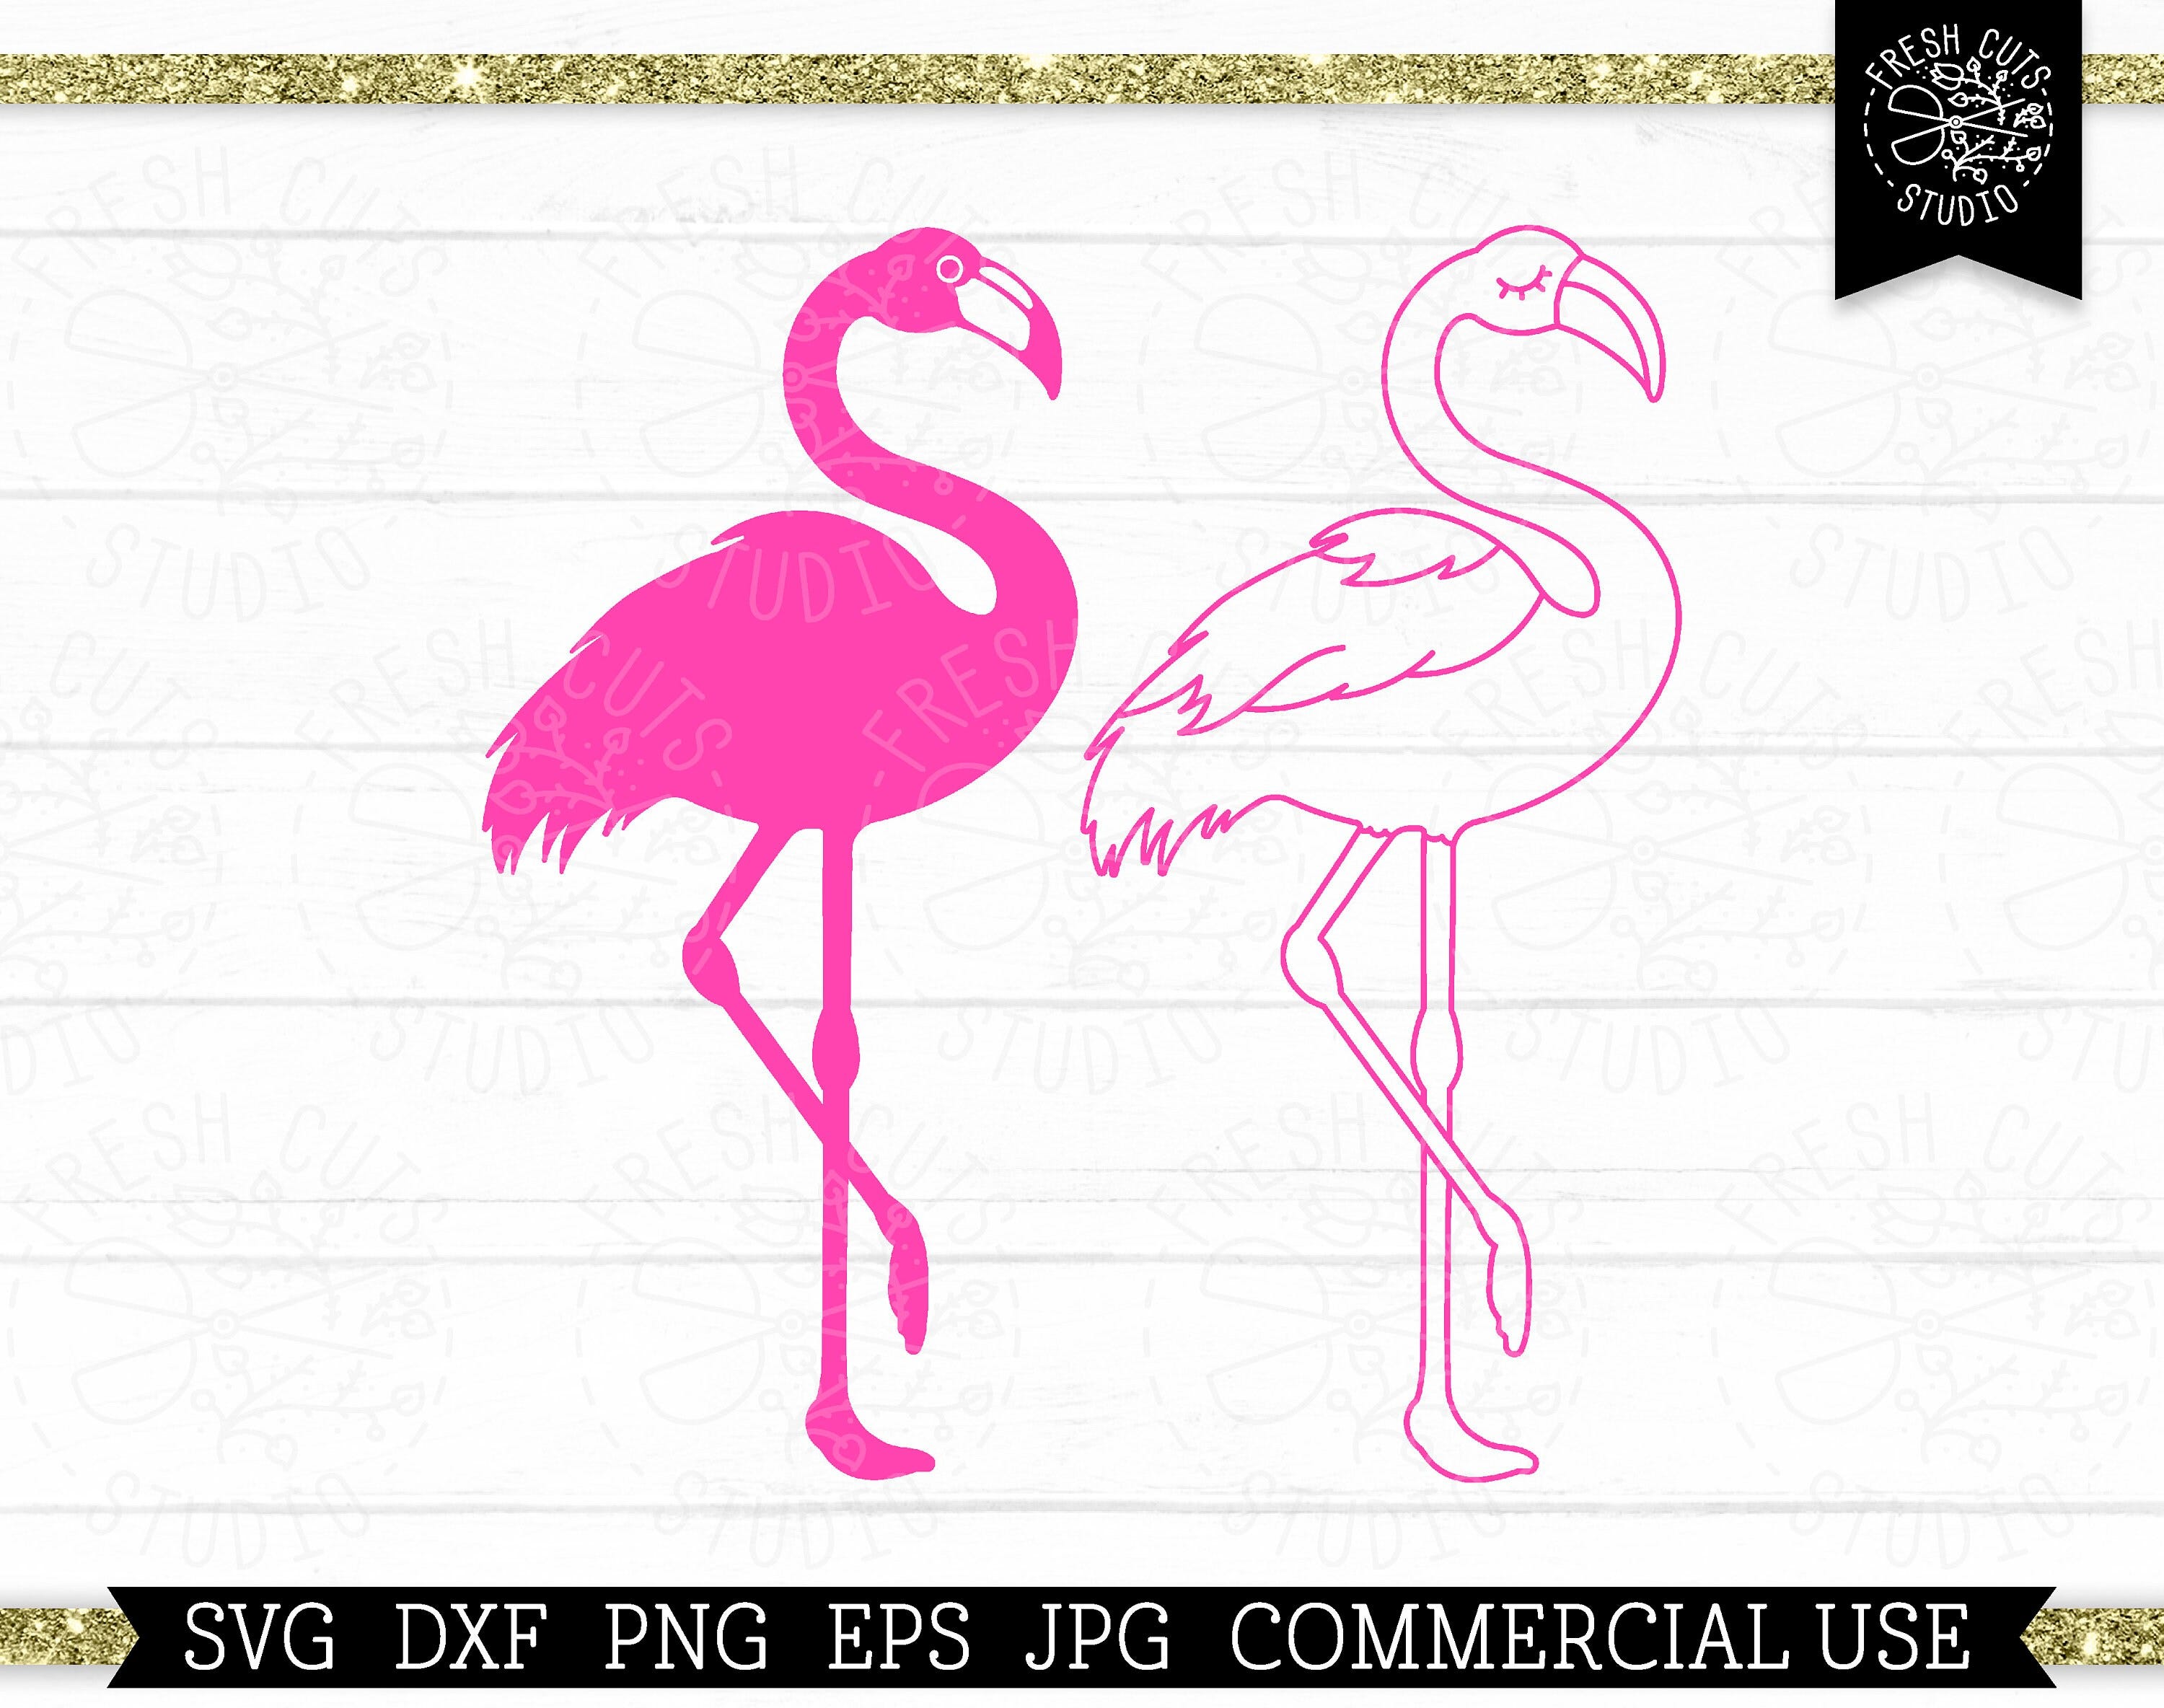 Flamingo Silhouette SVG Cut File for Cricut, Flamingo Line Drawing Clipart, Commercial Use svg, Tropical Beach Vacation, Vector, dxf png eps